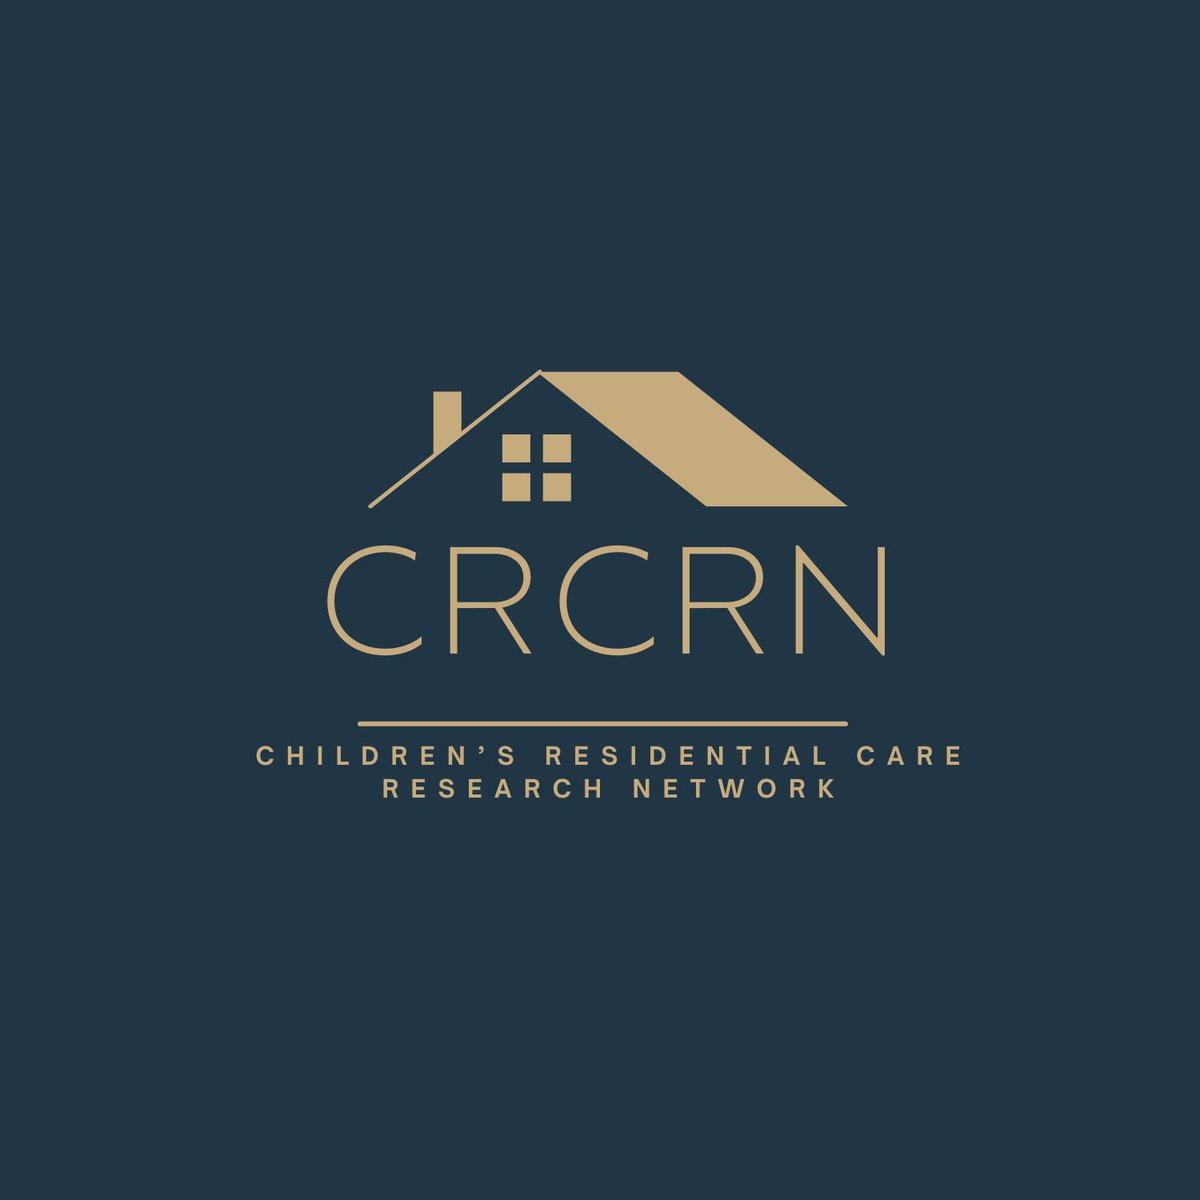 We are absolutely delighted to unveil our recently designed network logo!! 
#newlogo #logo #networklogo #CRCRNetwork #ResidentialCare #ChildrensResidentialCare